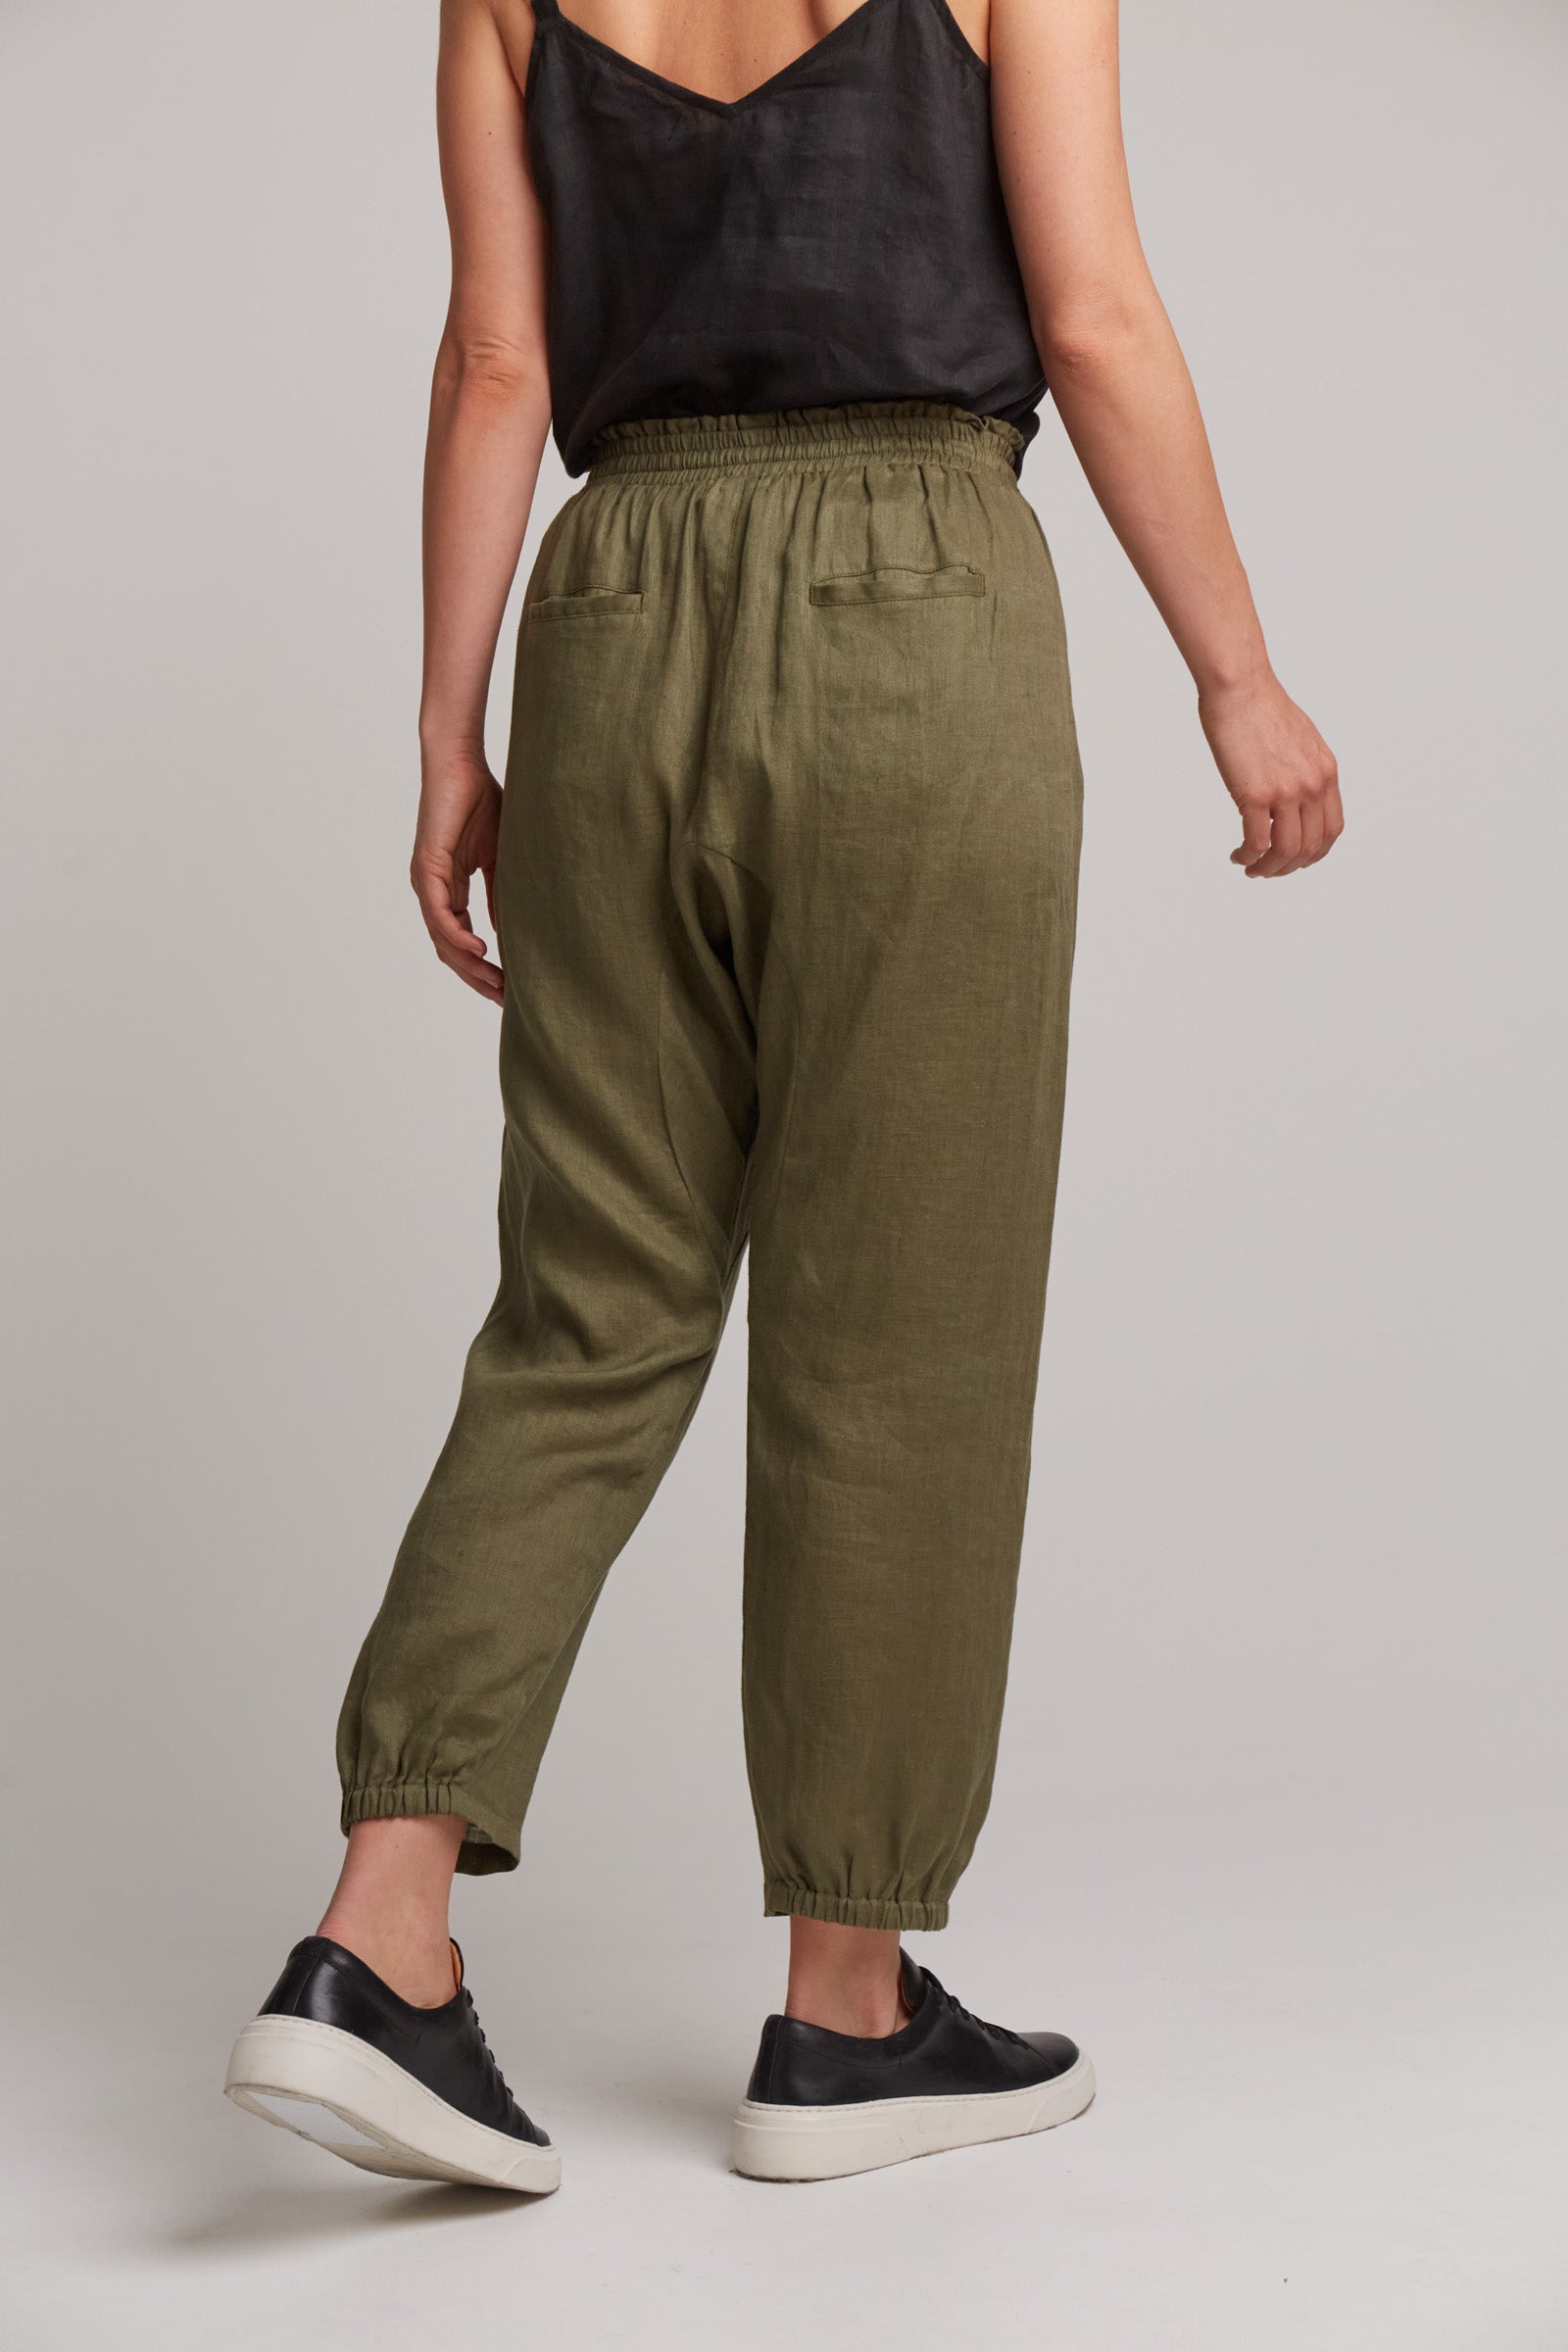 Studio Relaxed Pant - Khaki - eb&ive Clothing - Pant Relaxed Linen